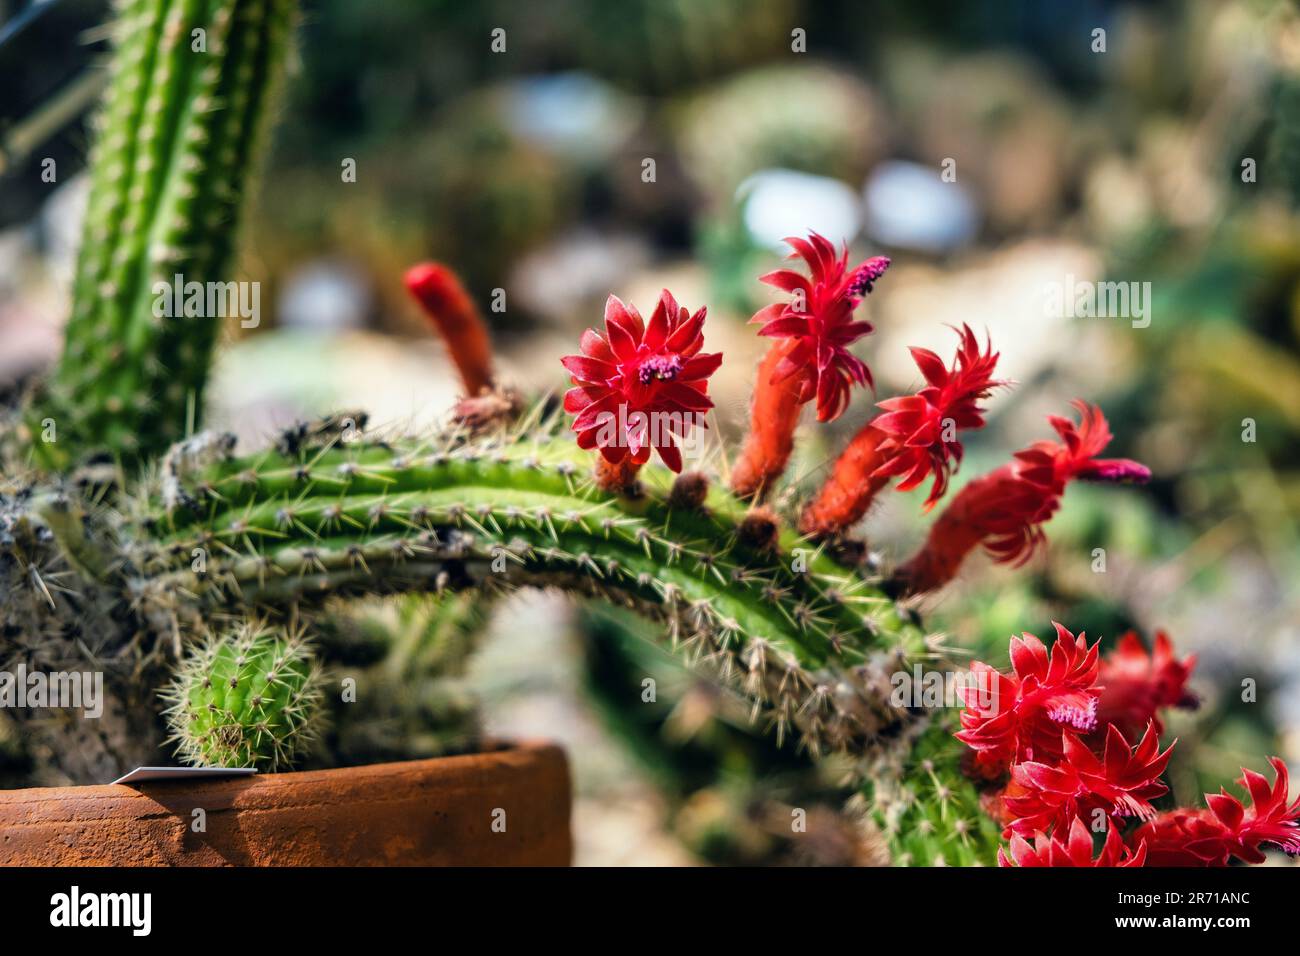 A closeup of a cactus plant with several small, vibrant red flowers growing from it. Stock Photo